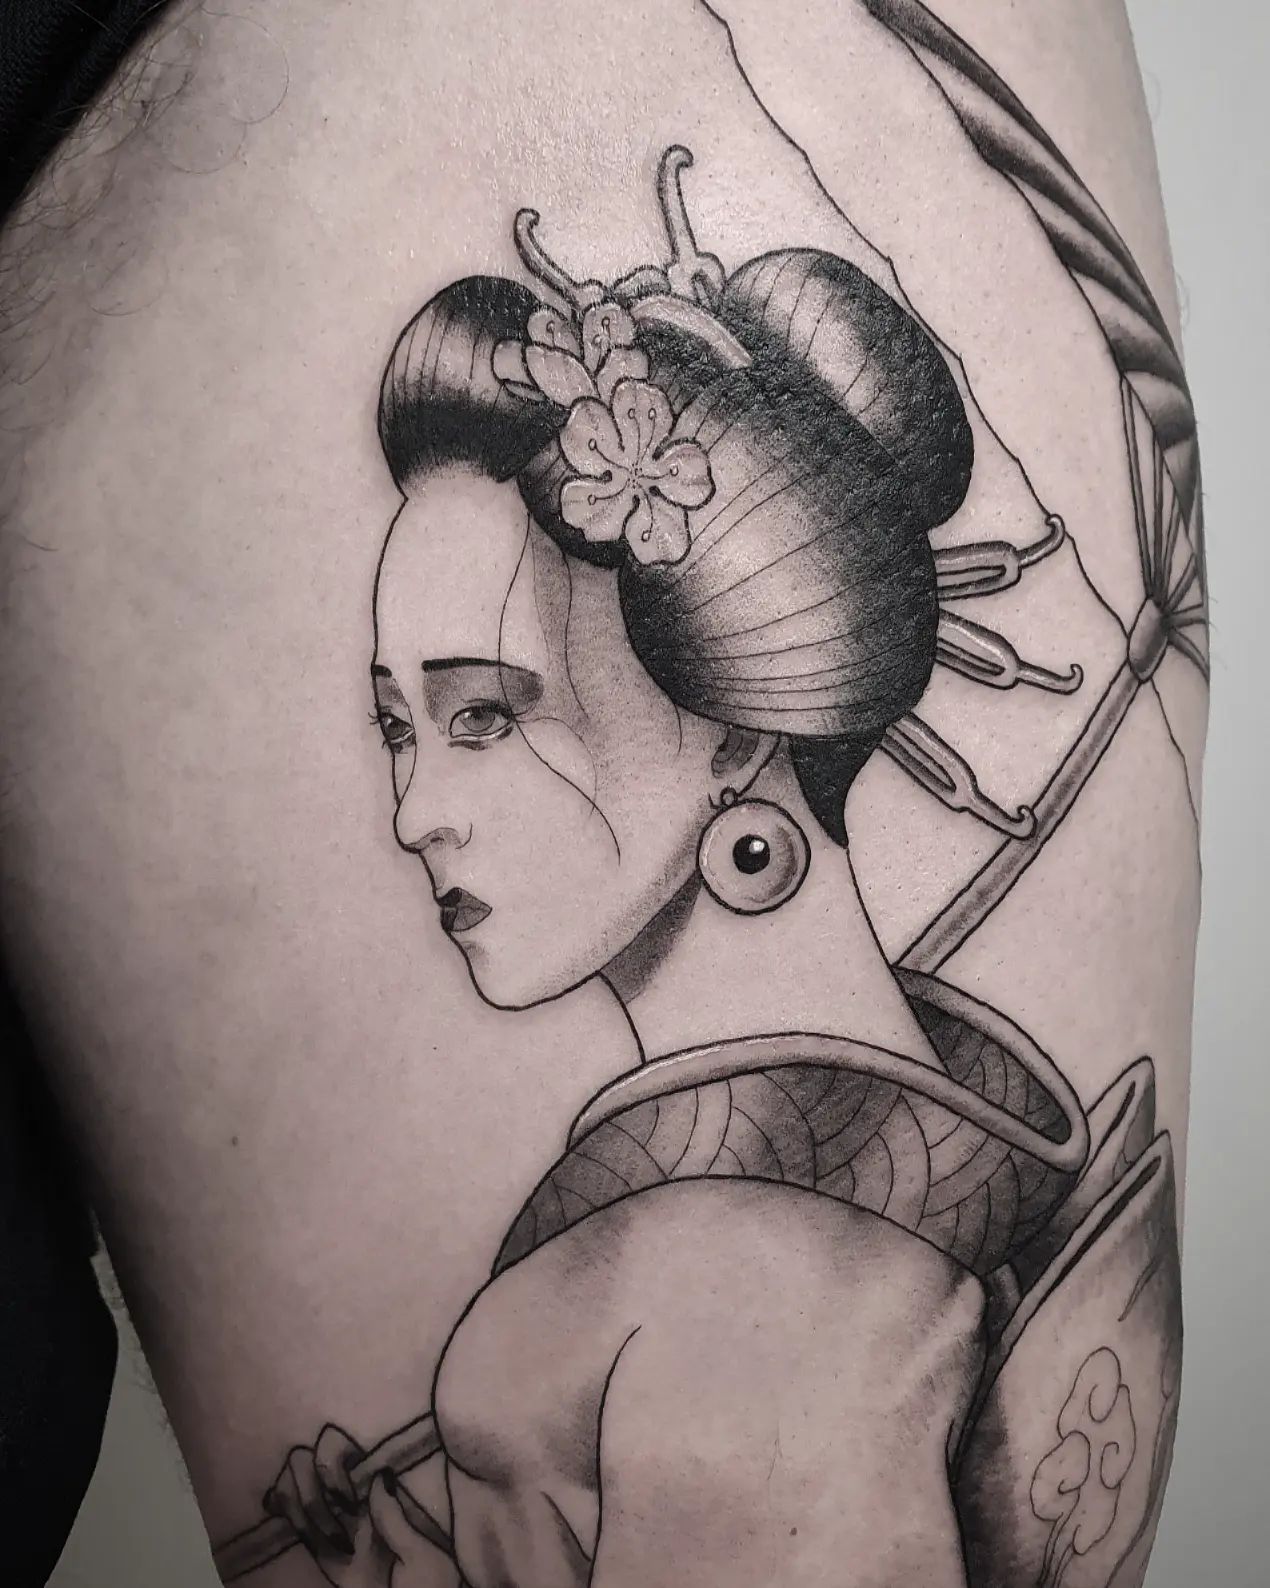 Started a leg sleeve with this Geisha today